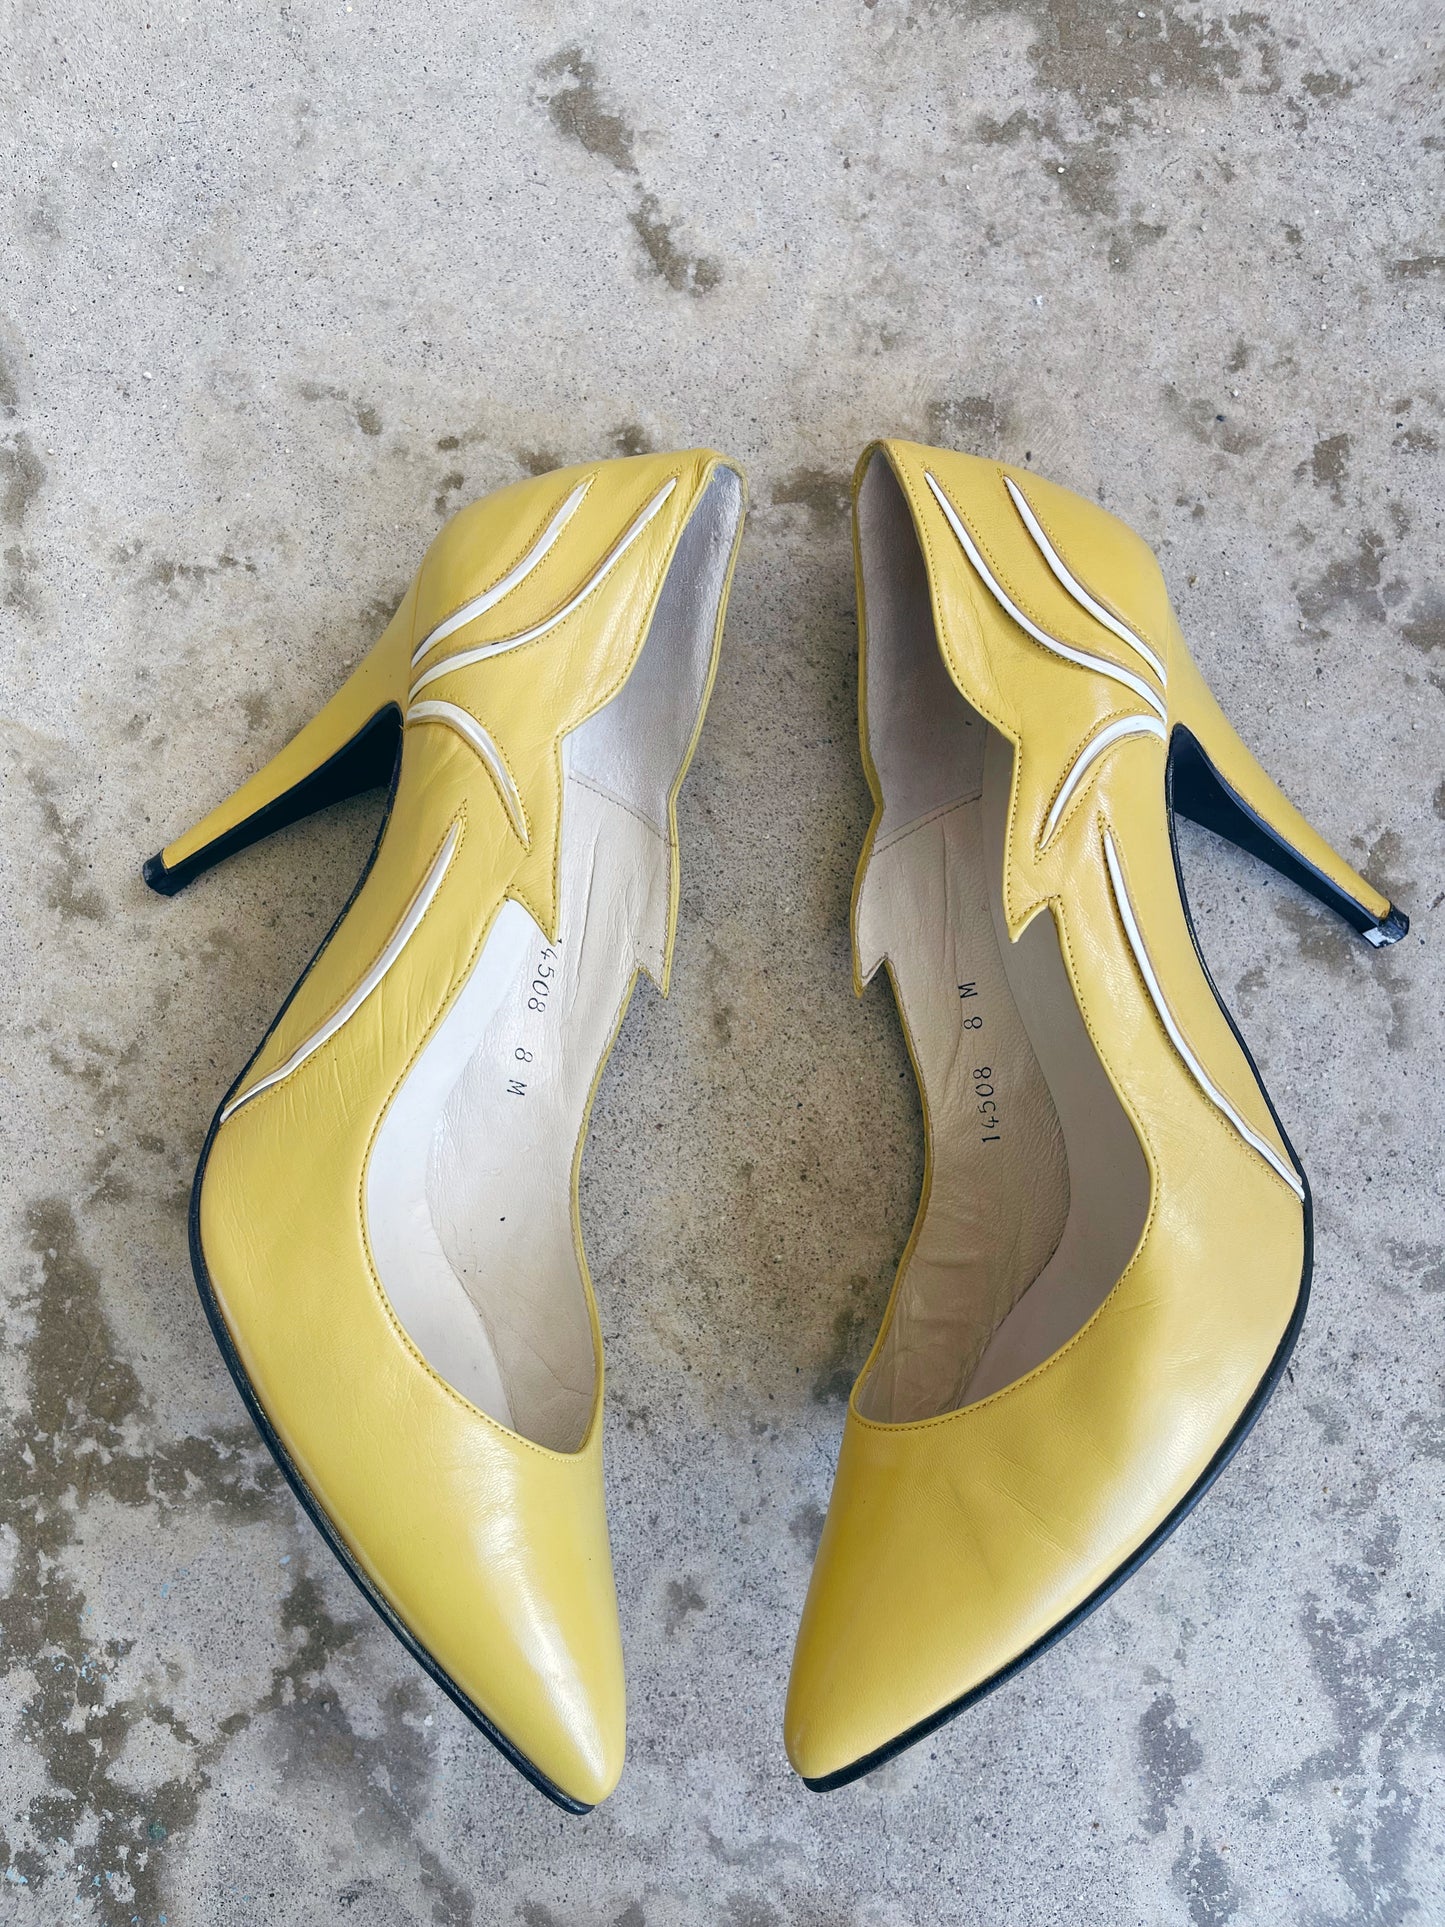 Vintage 70s / 80s "Totar" Brand Mellow Yellow with White Trim 4” Heels US Size 8 *Shoe Box Not Included*